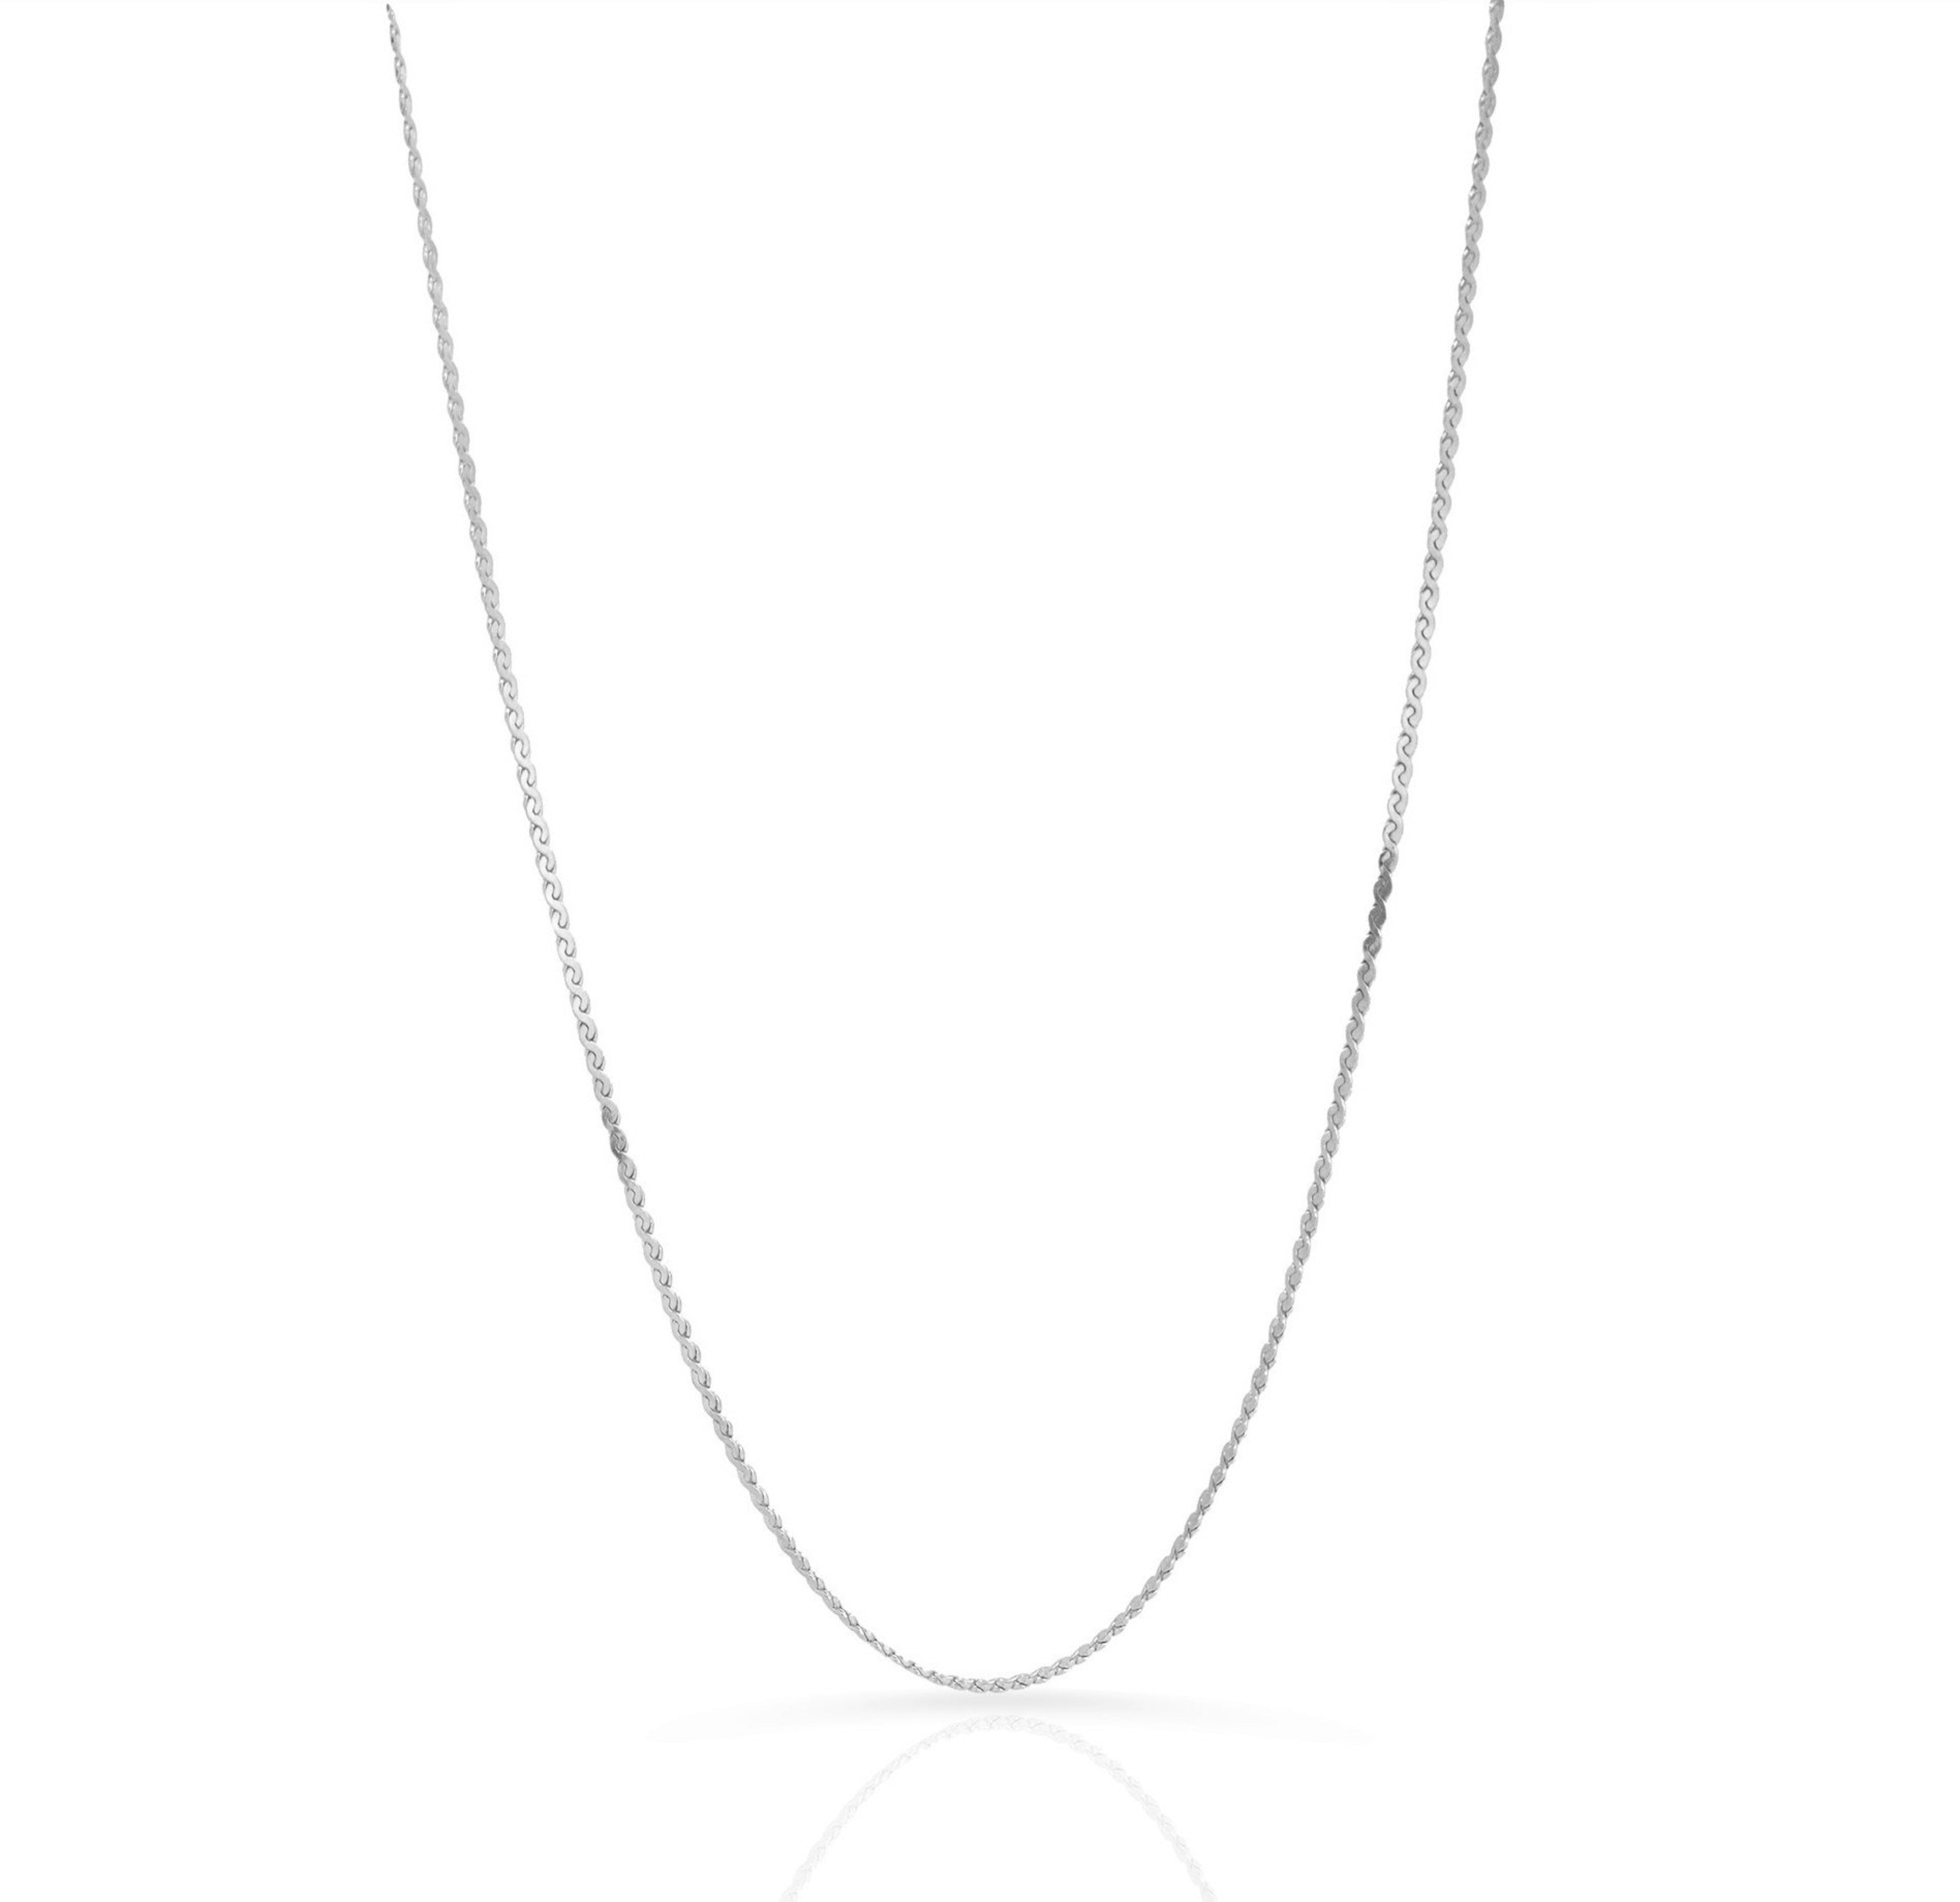 FAYE SILVER THIN CHAIN NECKLACE SAMPLE